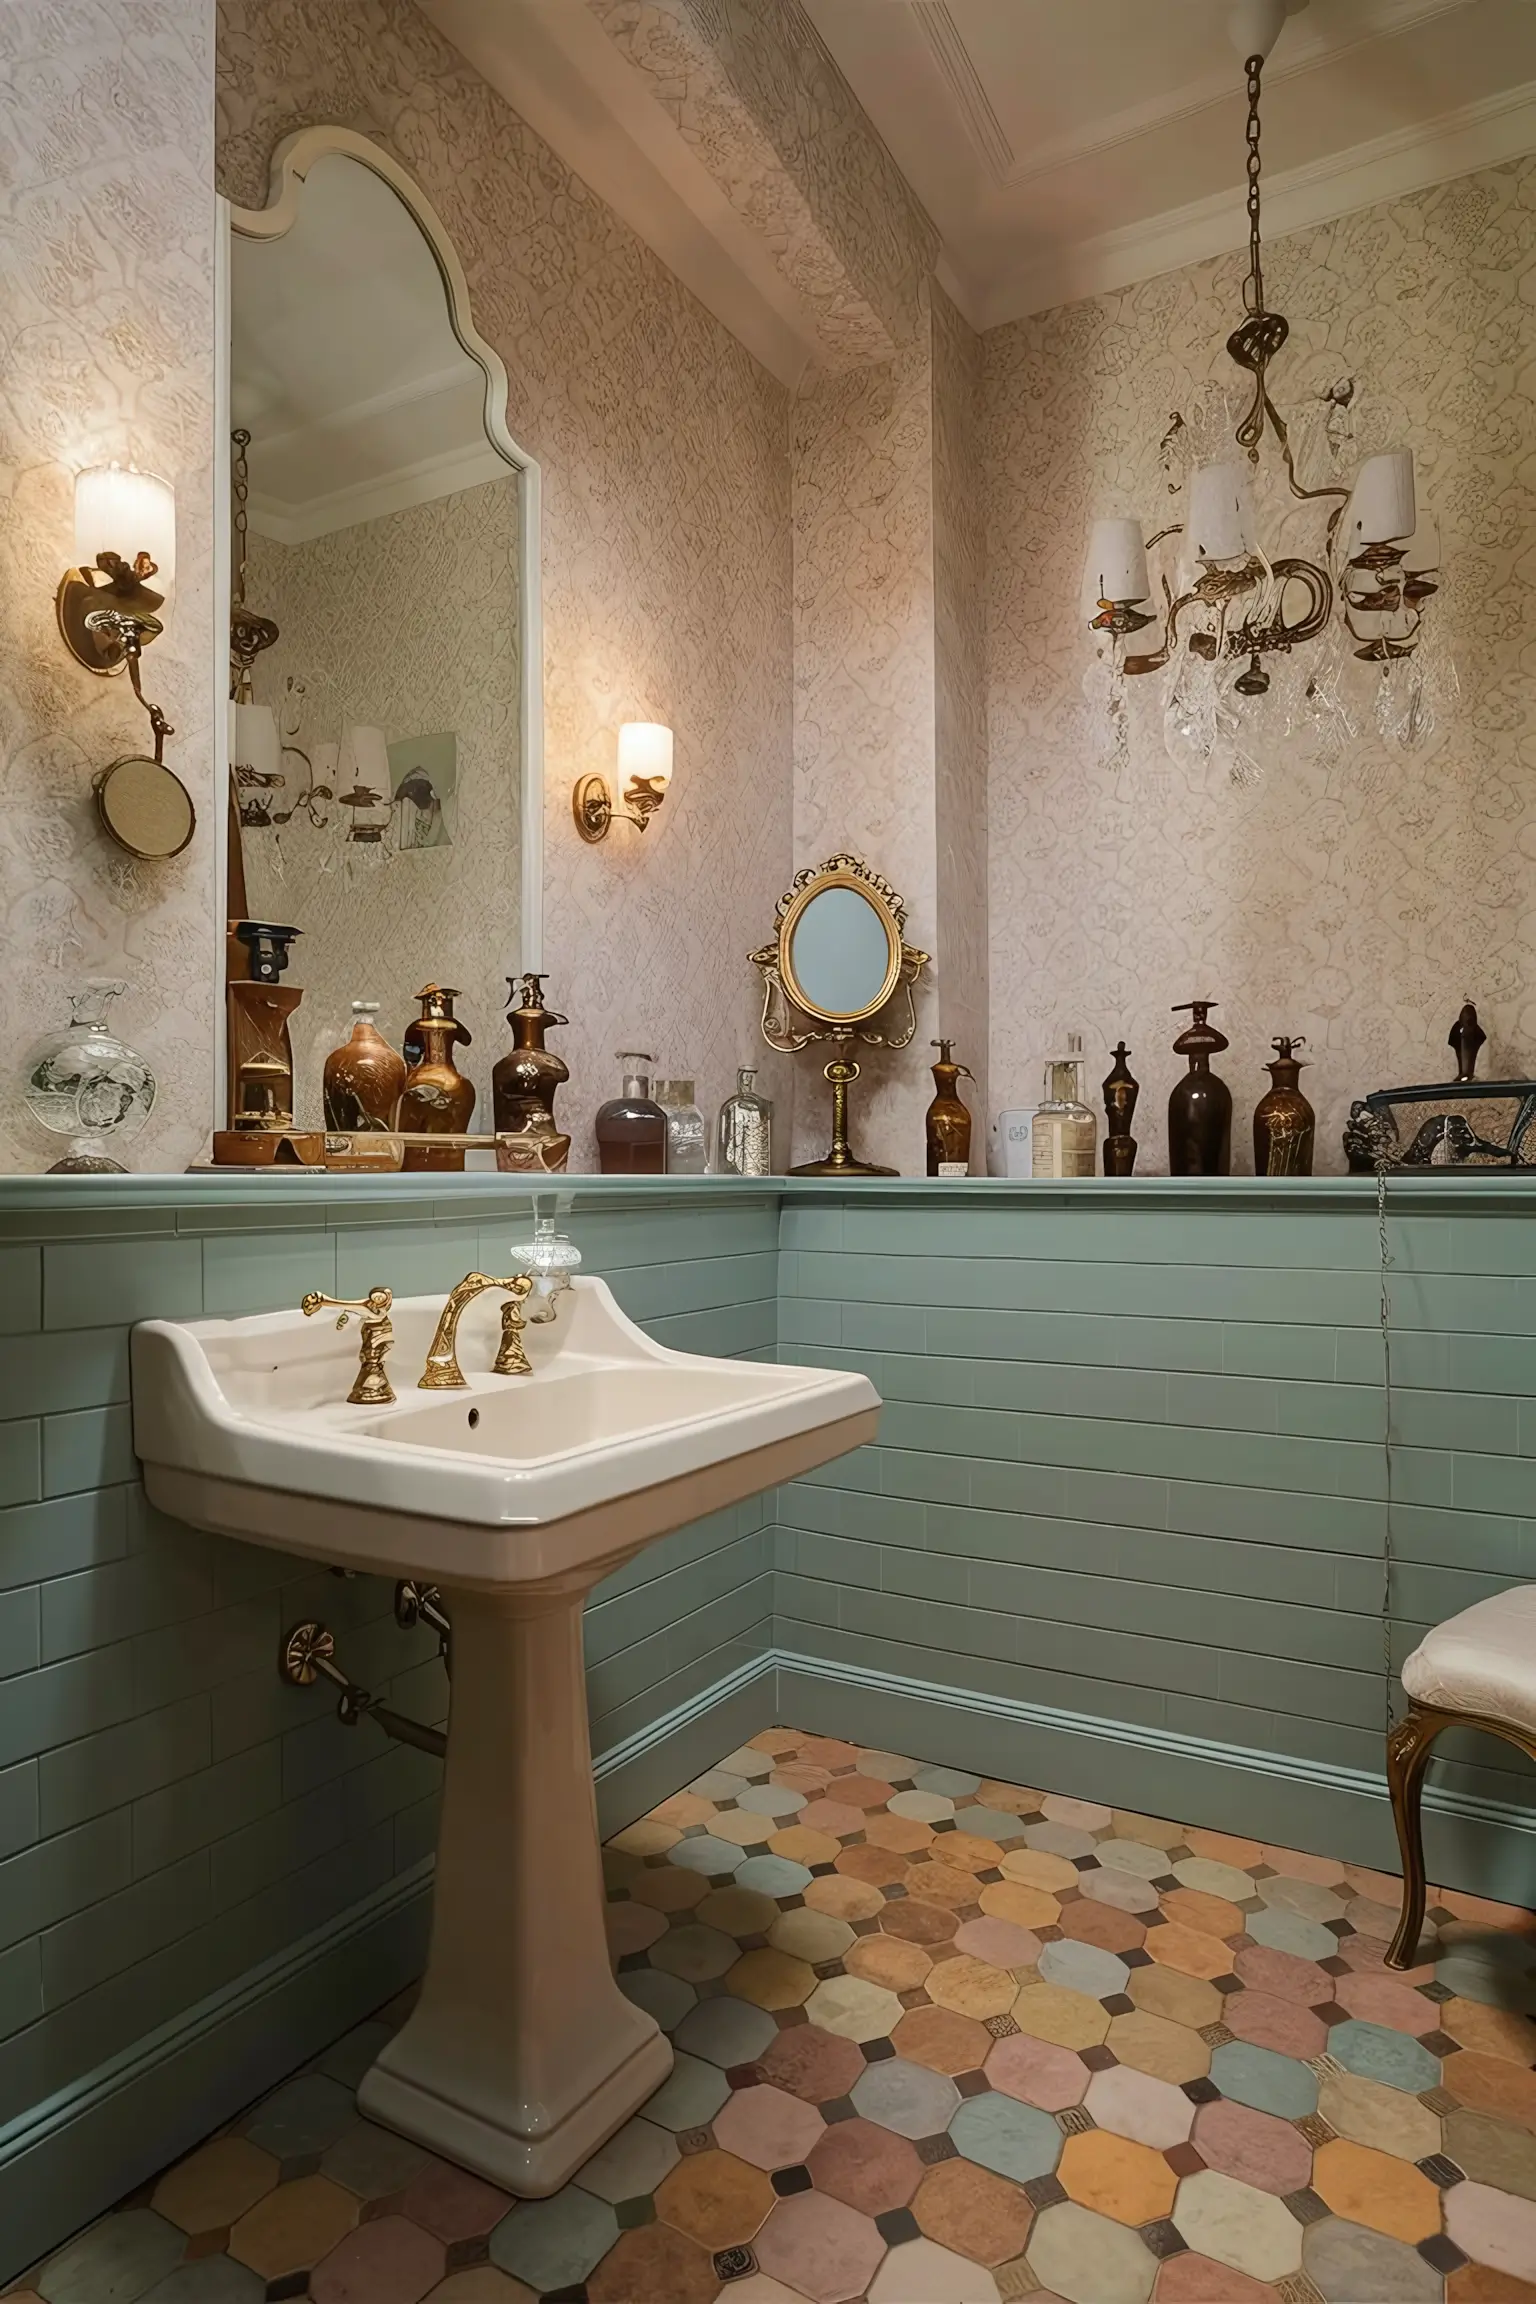 Traditional bathroom with vintage inspired decor, including antique accessories, a pedestal sink, and patterned wallpaper.